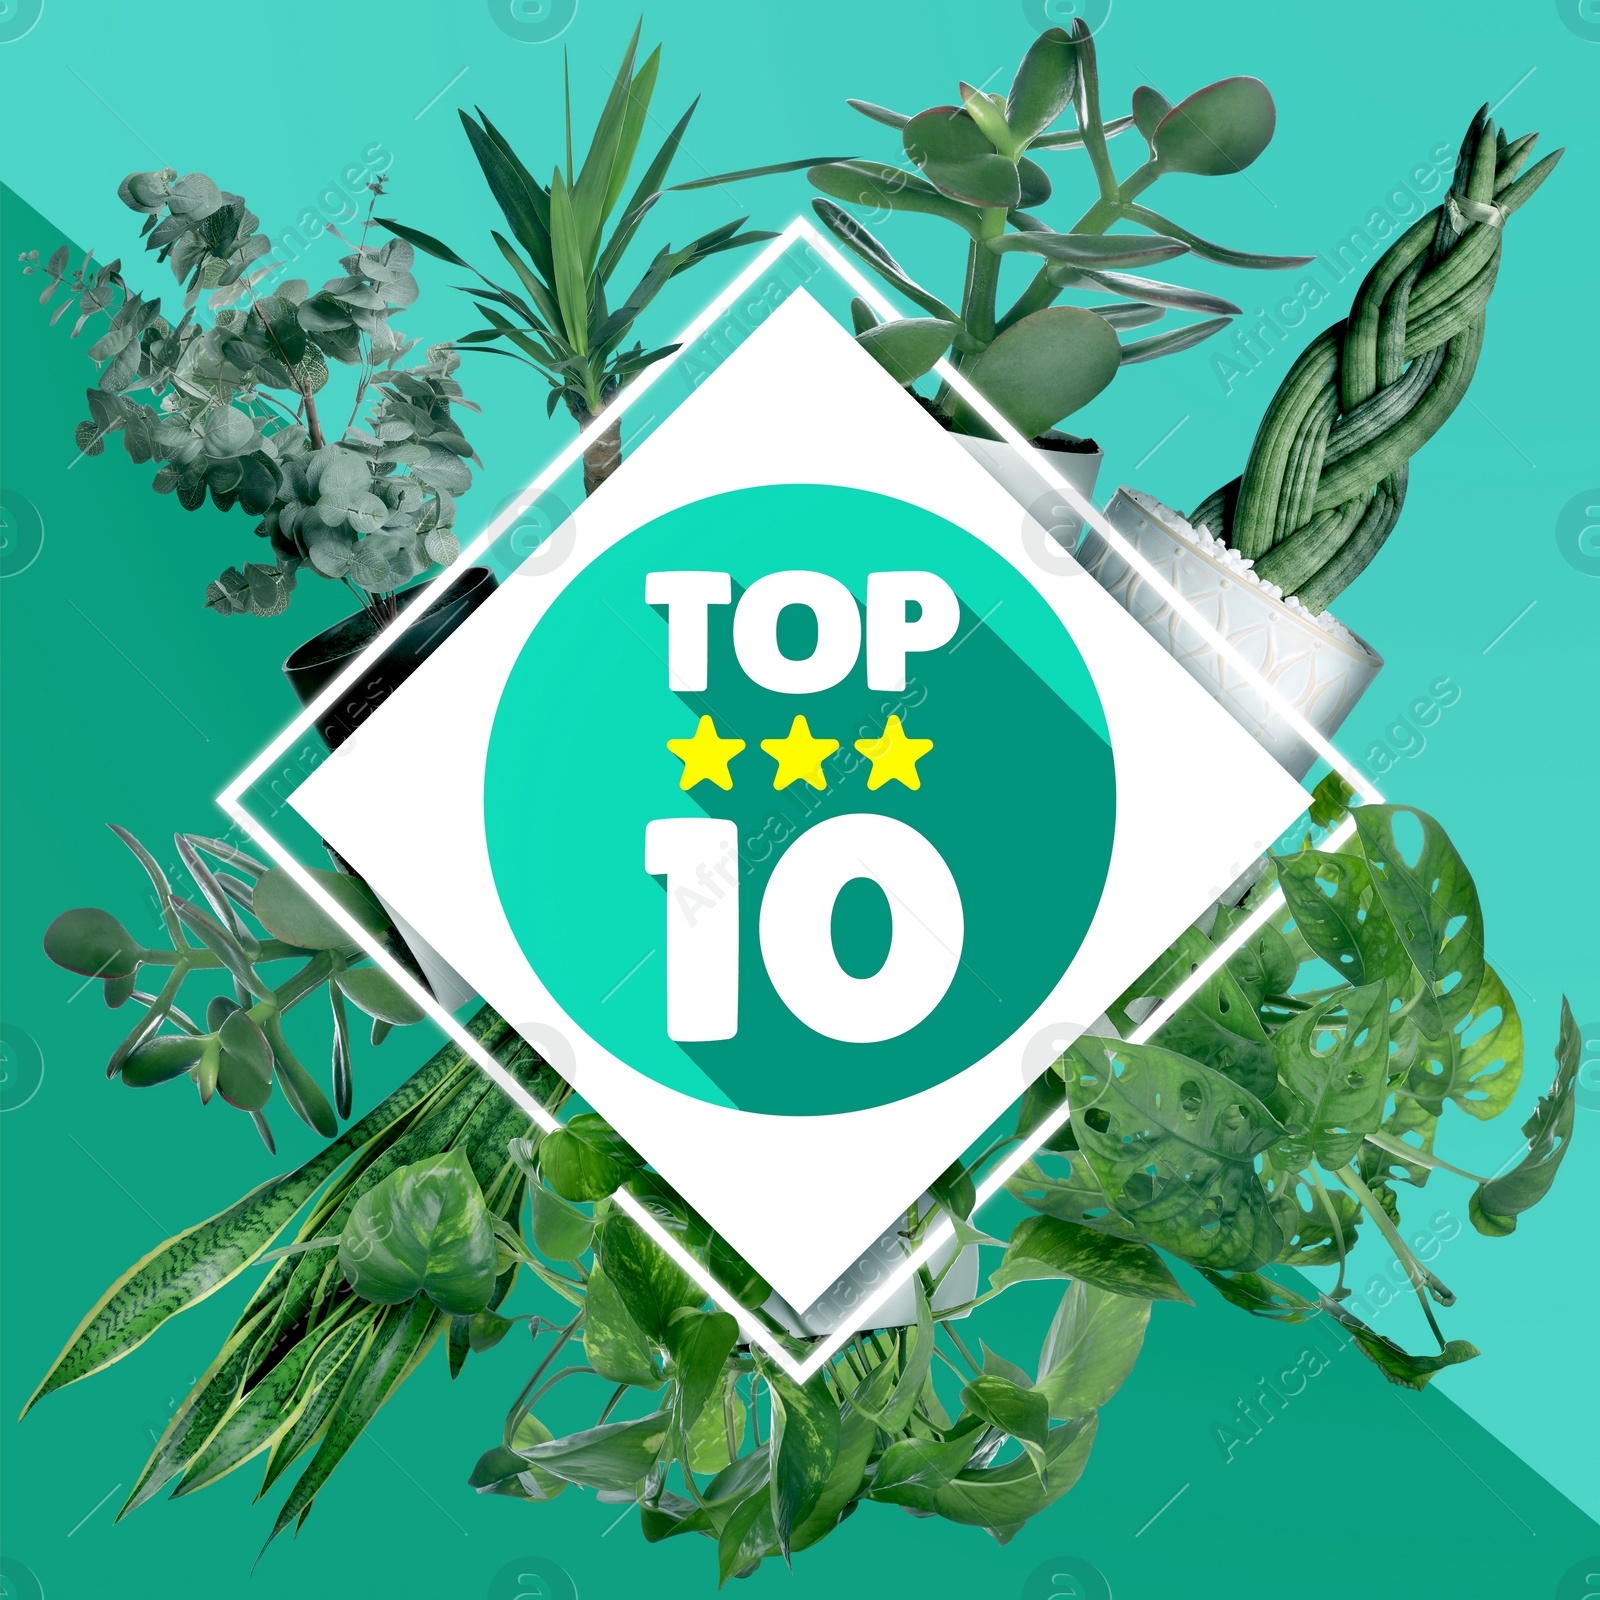 Image of Top ten list of houseplants on teal and turquoise background